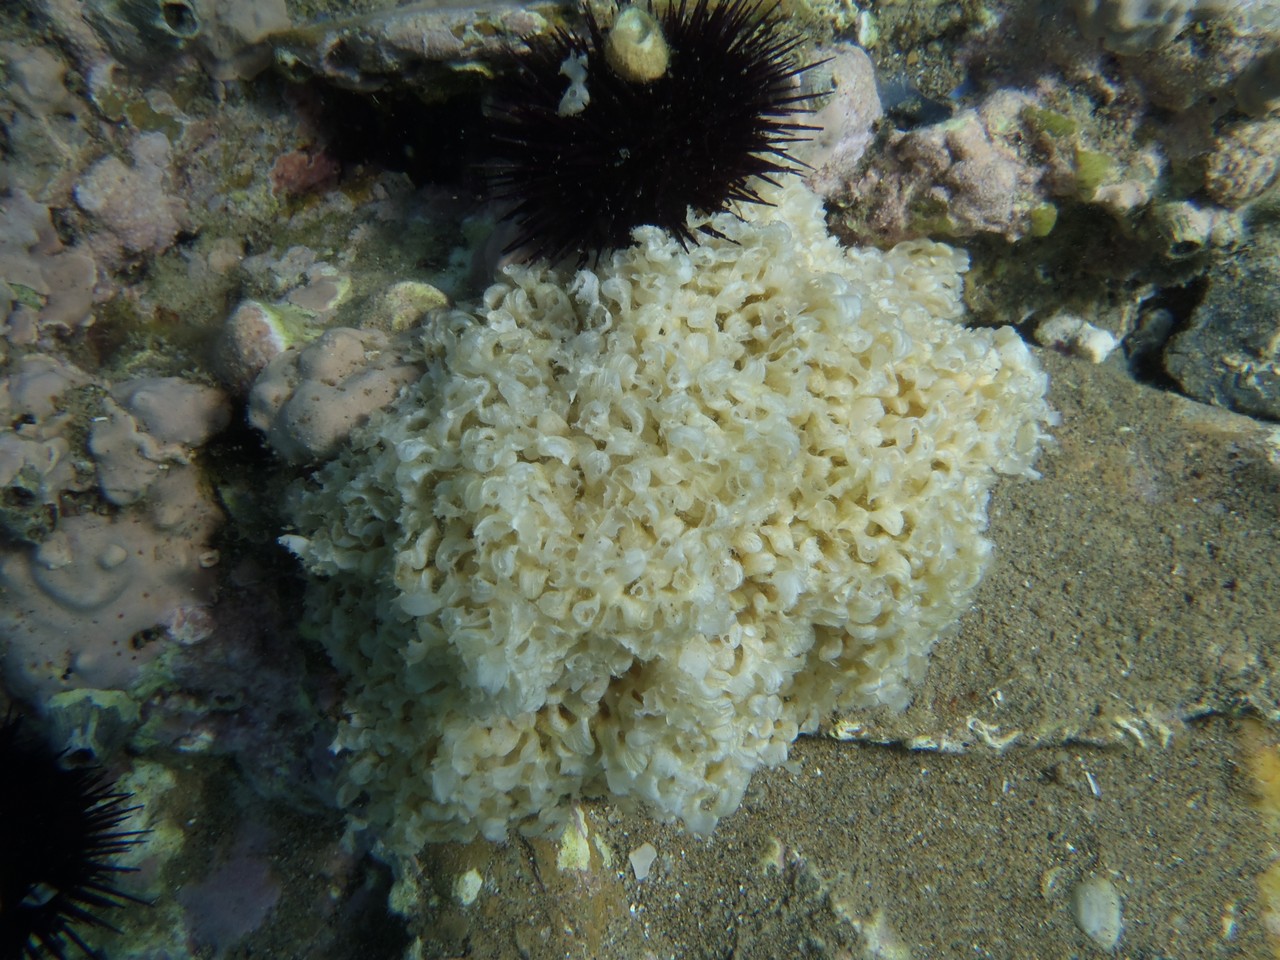 a starfish hiding under a sea coral on the water